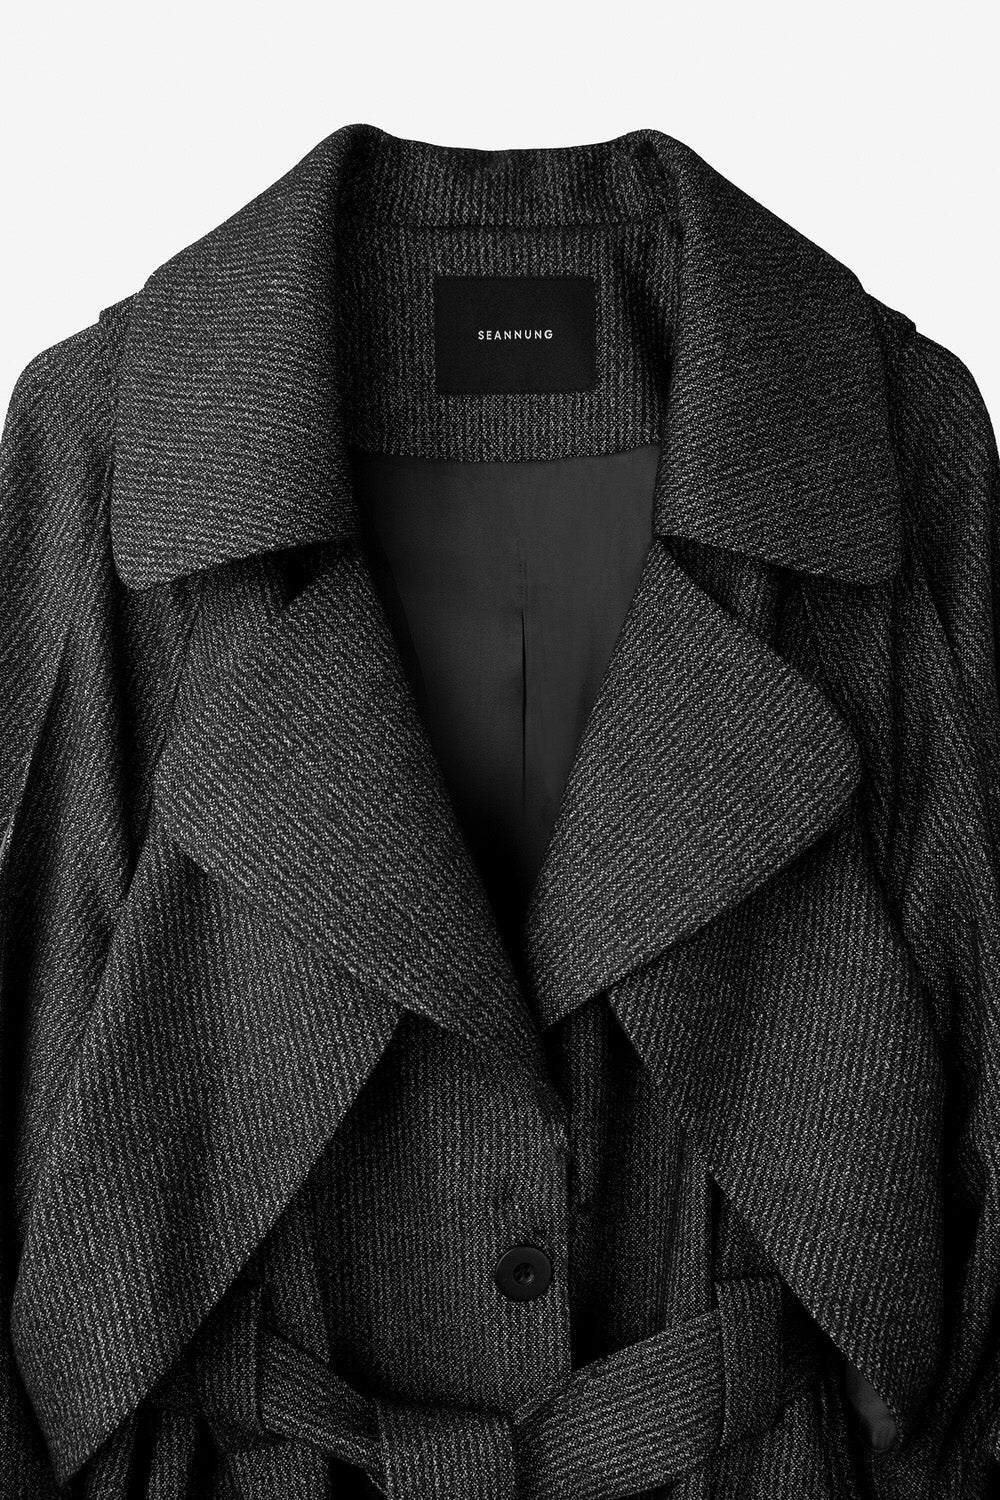 Double-Layered Shoulder-off Coat